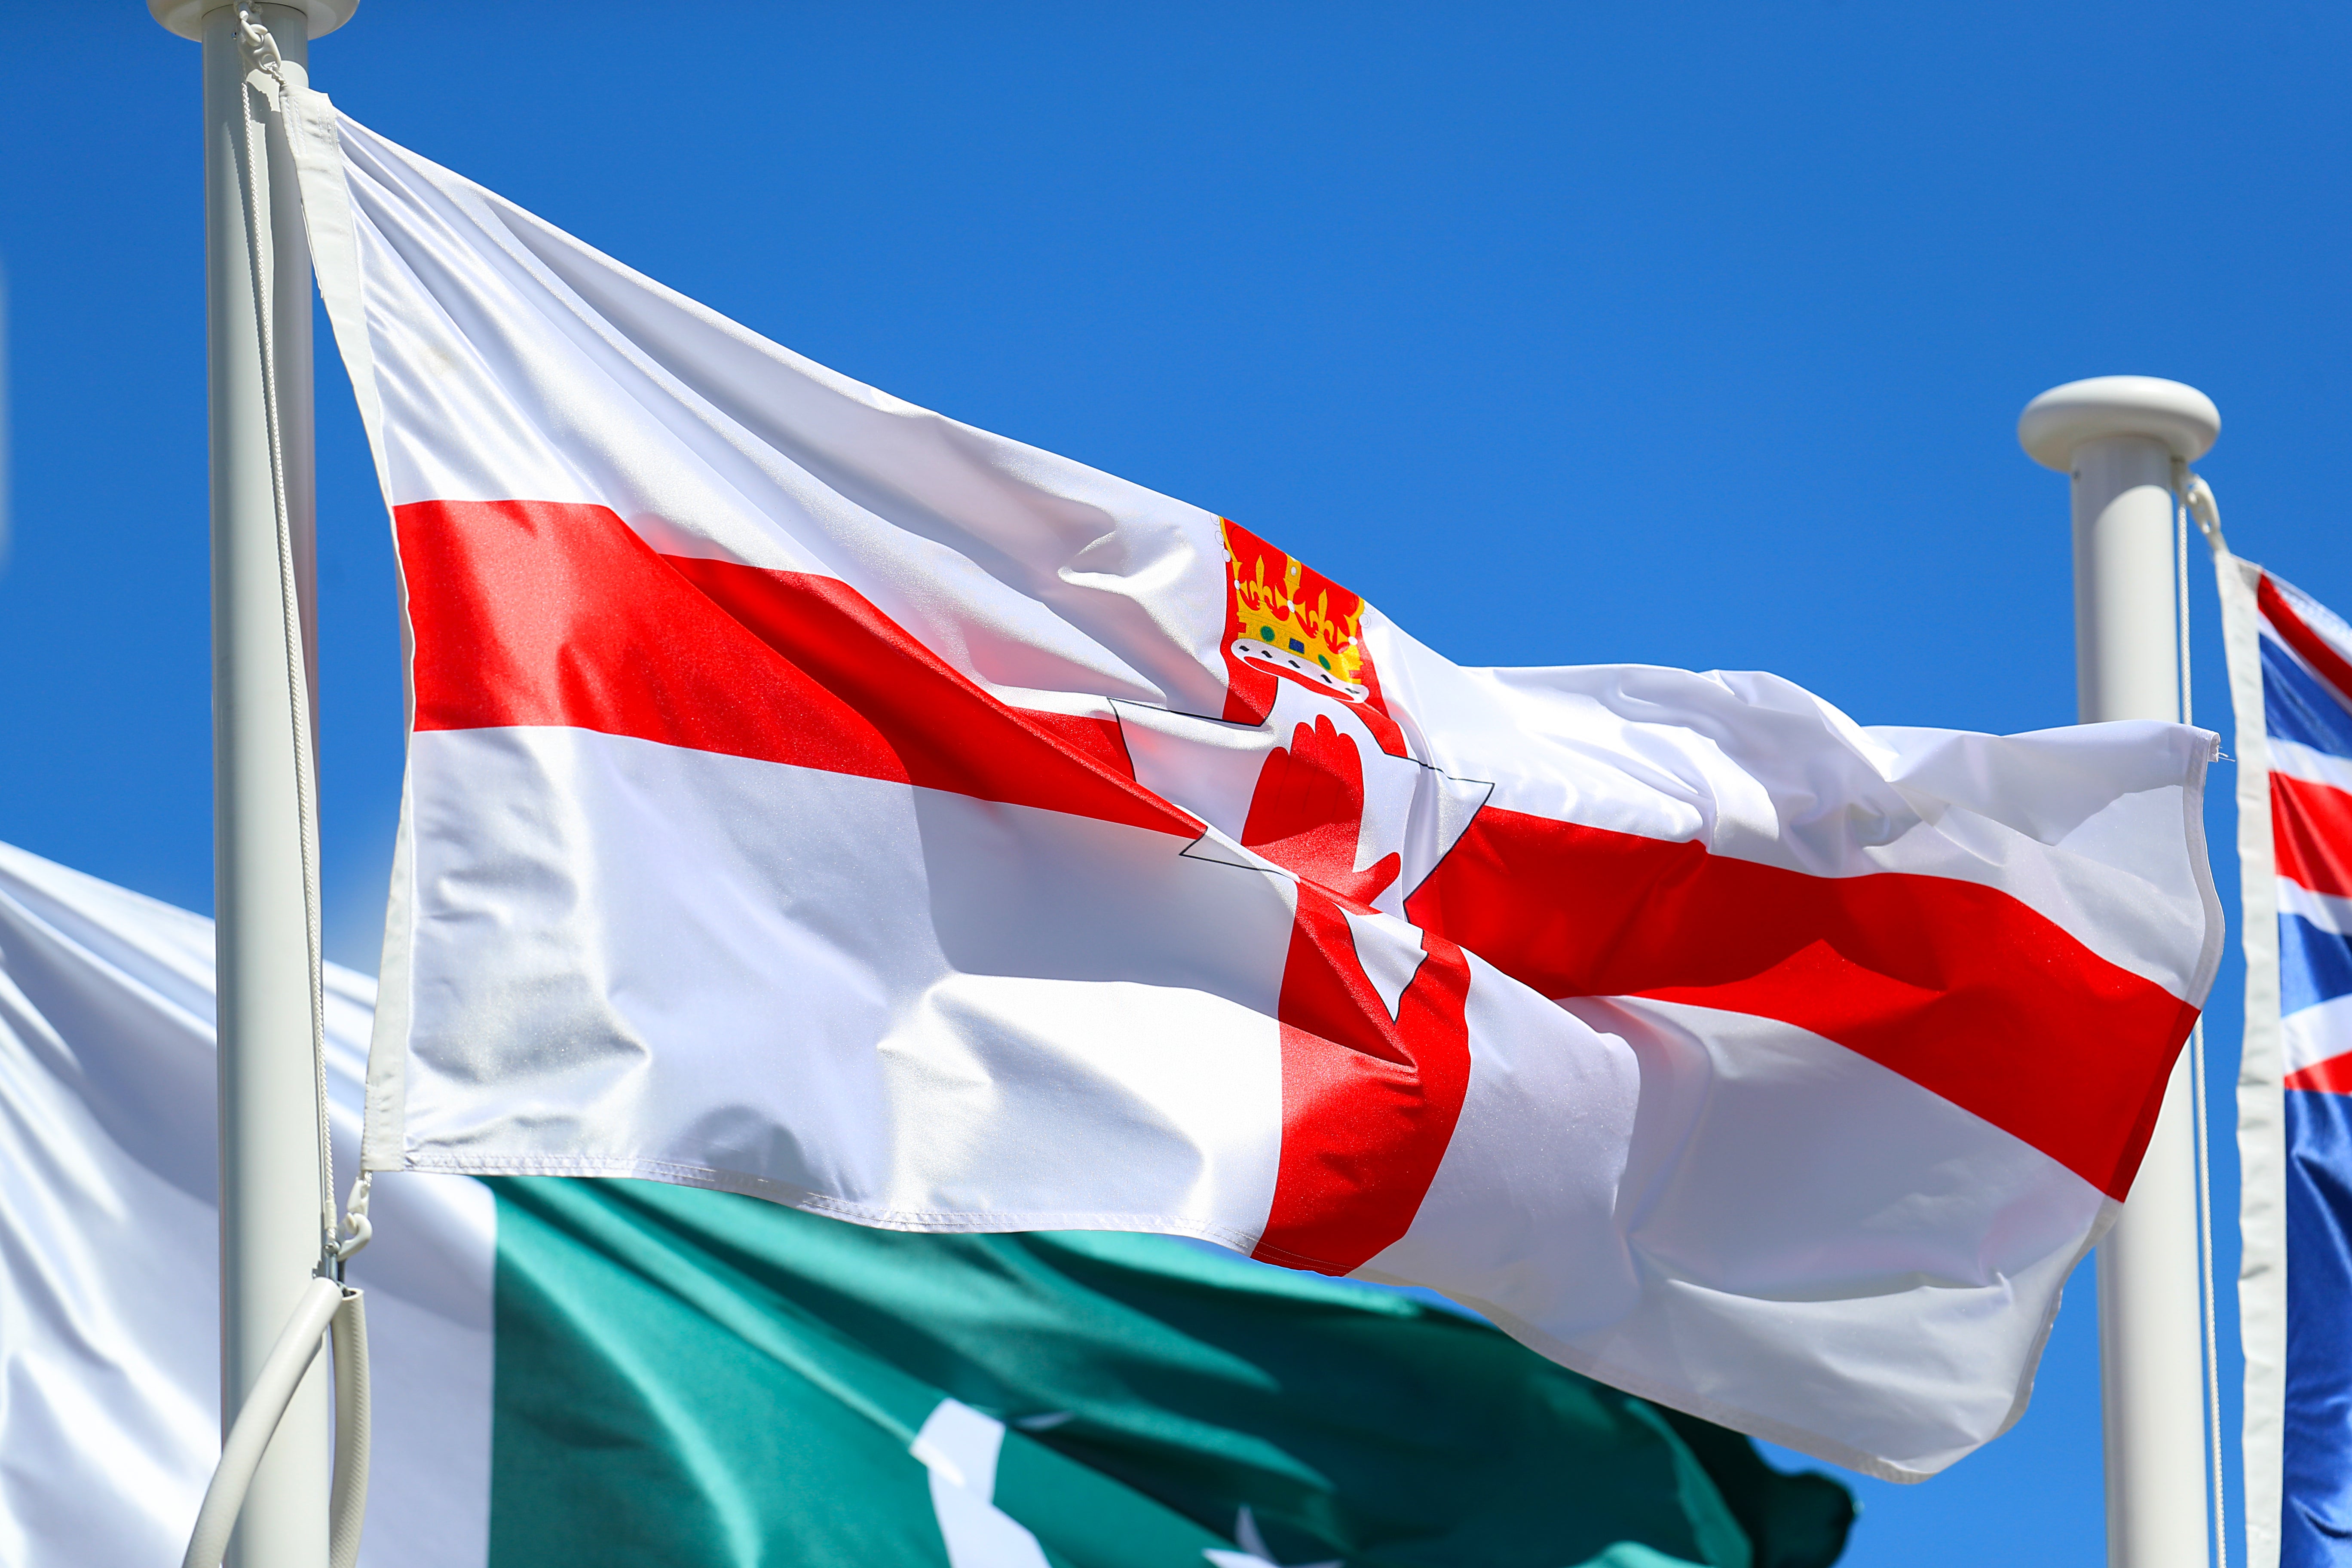 The flag of Northern Ireland on a pole at the Commonwealth Games (Mike Egerton/PA)